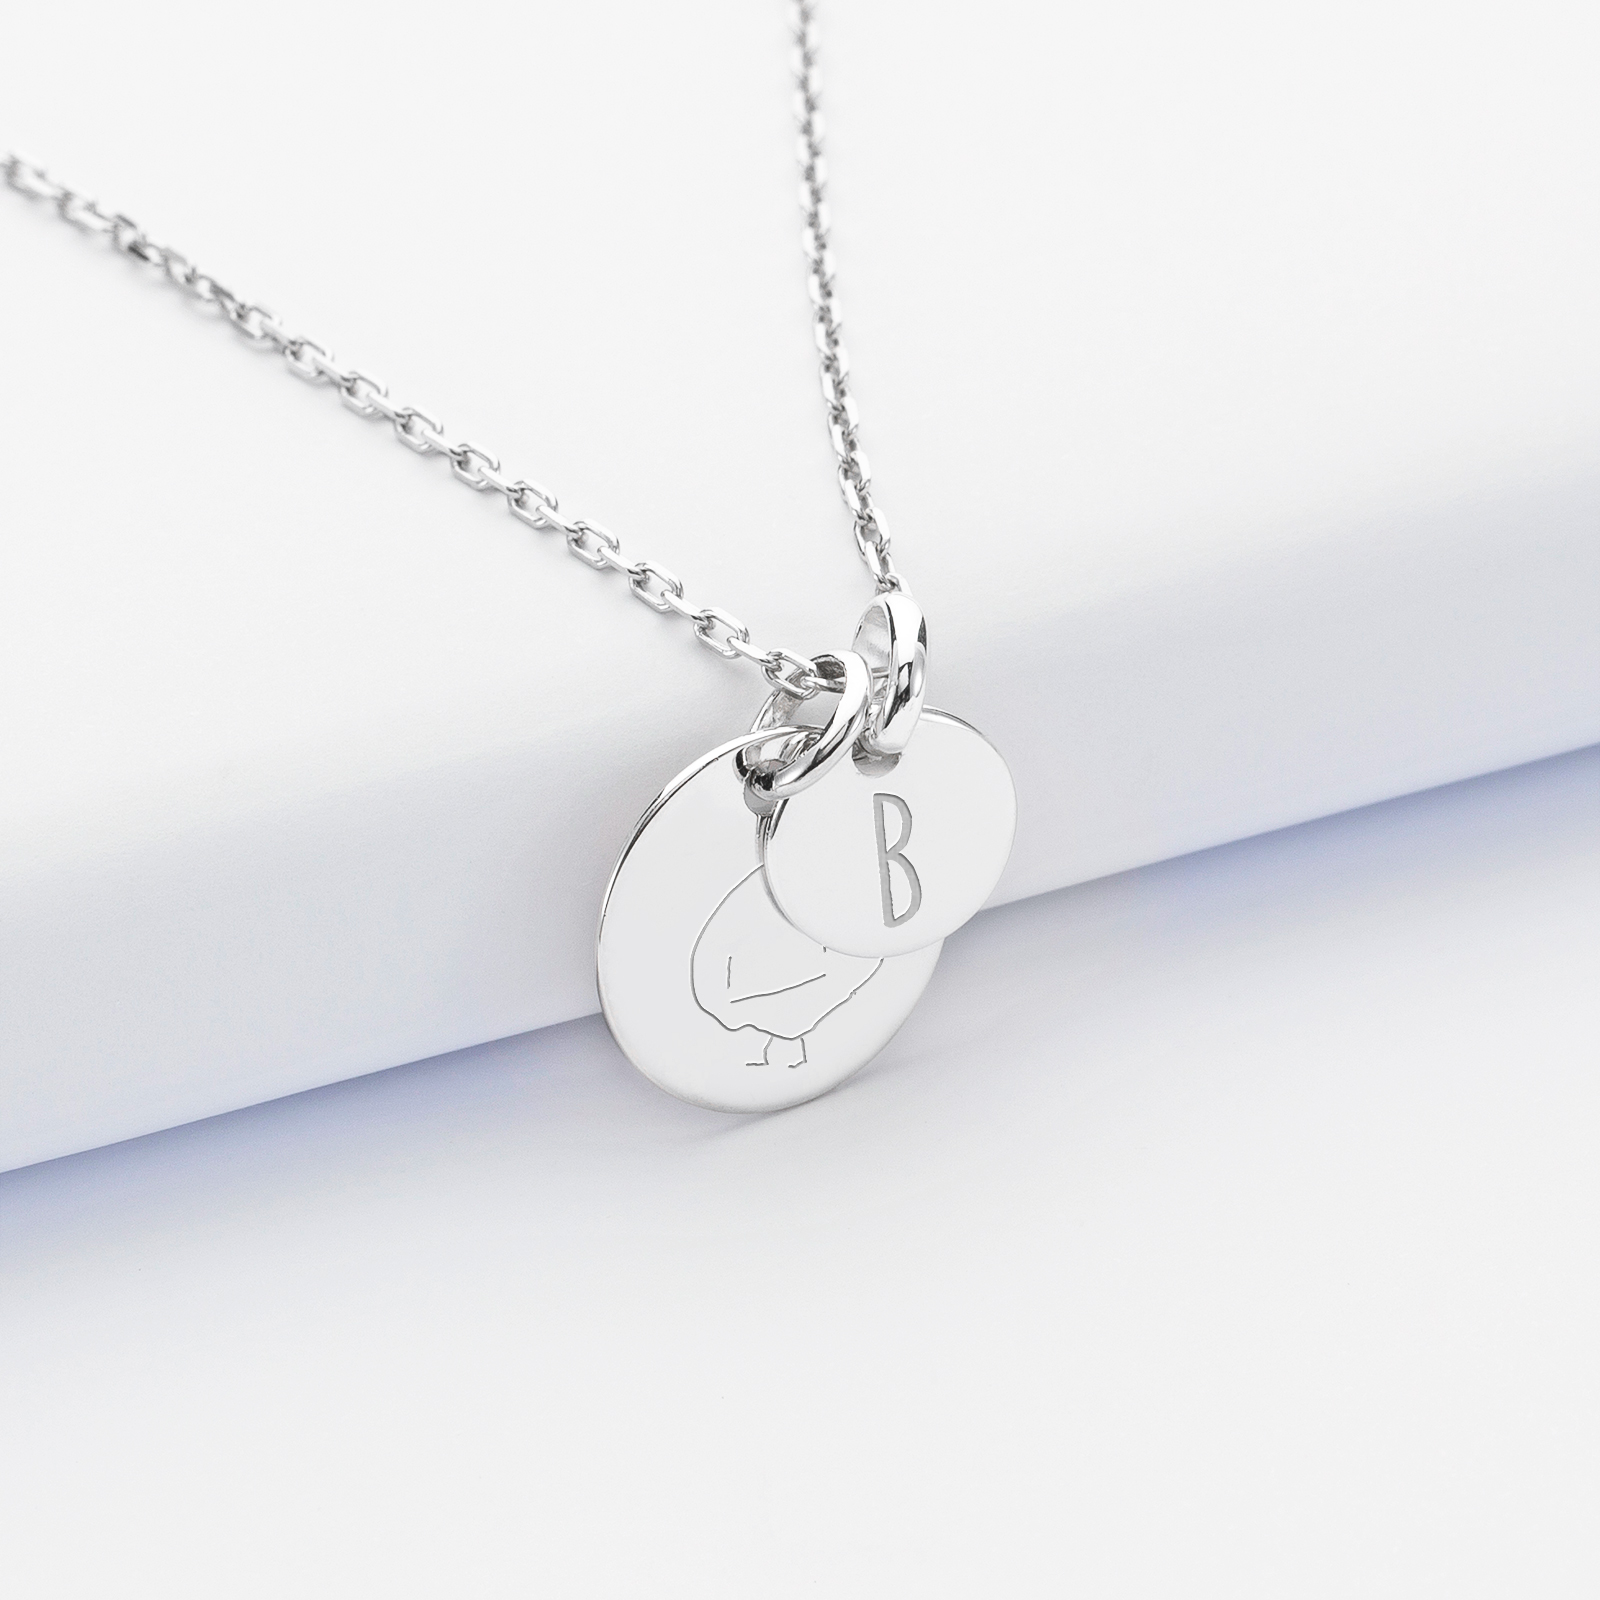 Personalised engraved silver medallion pendant 15 mm and round charm 10mm sketch